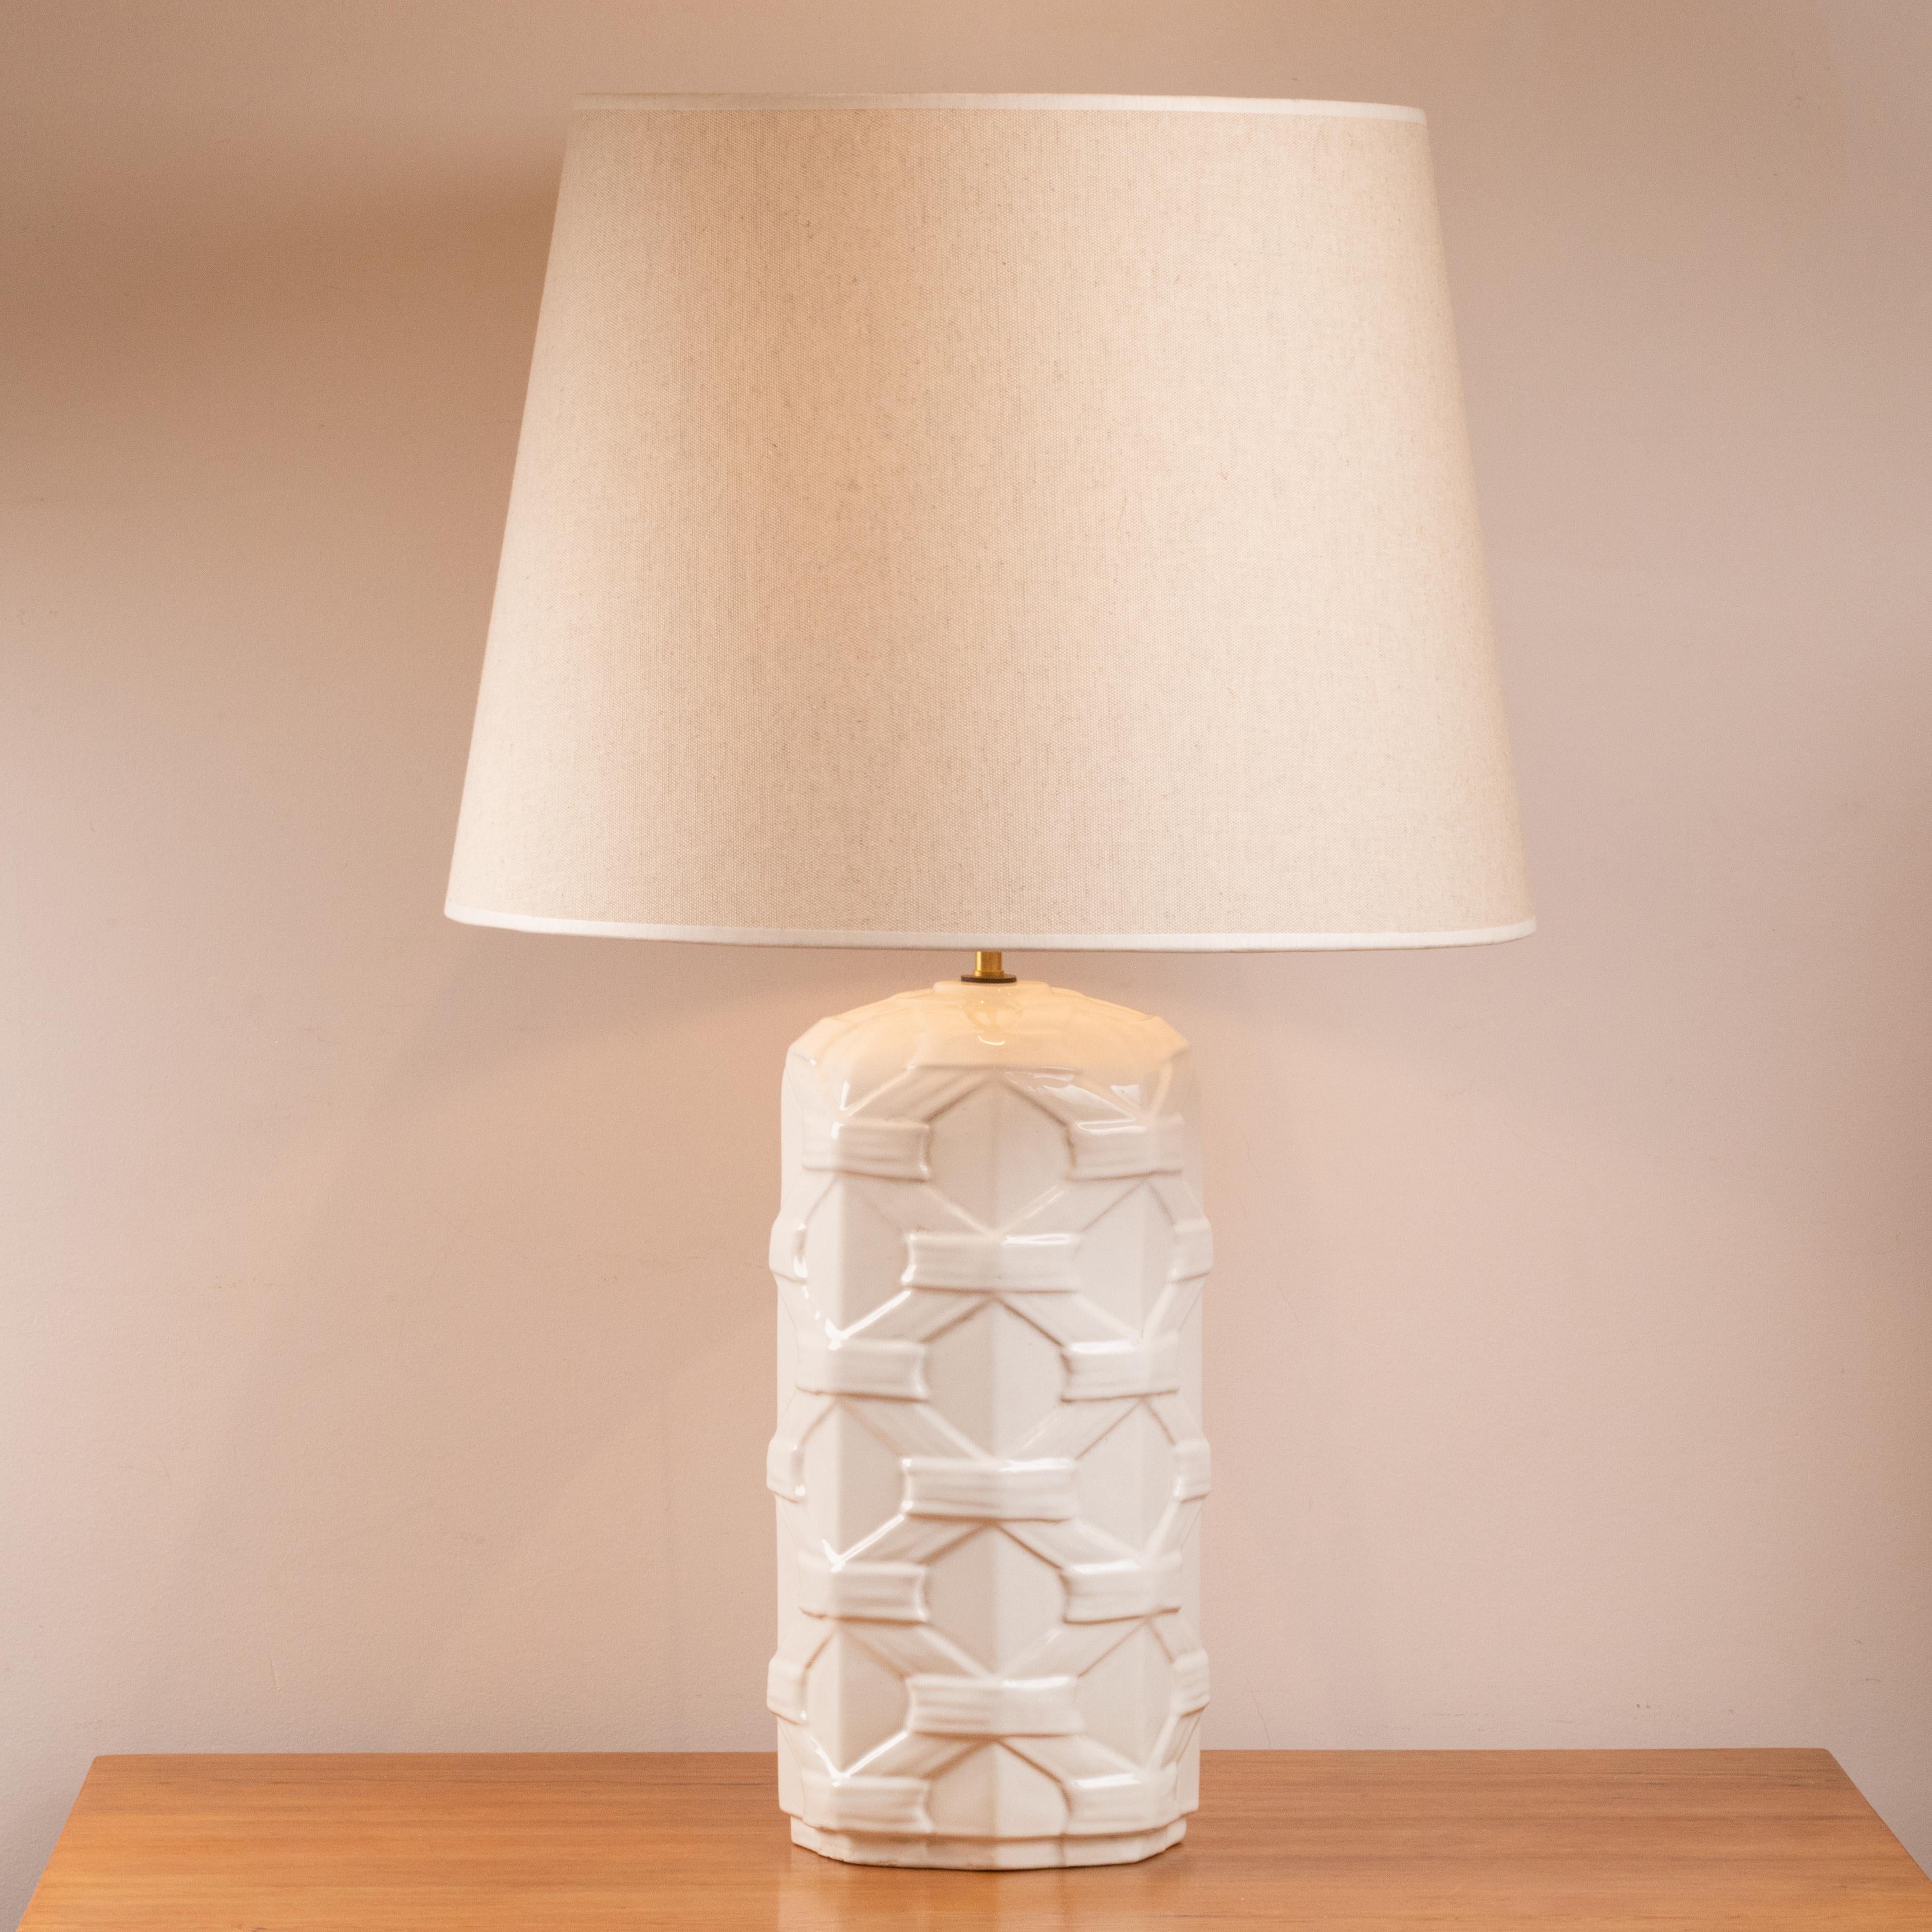 White ceramic table lamp with relief braid pattern

Marked: M4049 for Christian Dior

Made in Italy ,70’s

New shade.

Dimensions : 

Height ceramic: 38 cm (15 inch)
total Height ( with shade) : 77,5 cm ( 30.5 inch)
Diameter shade : 48